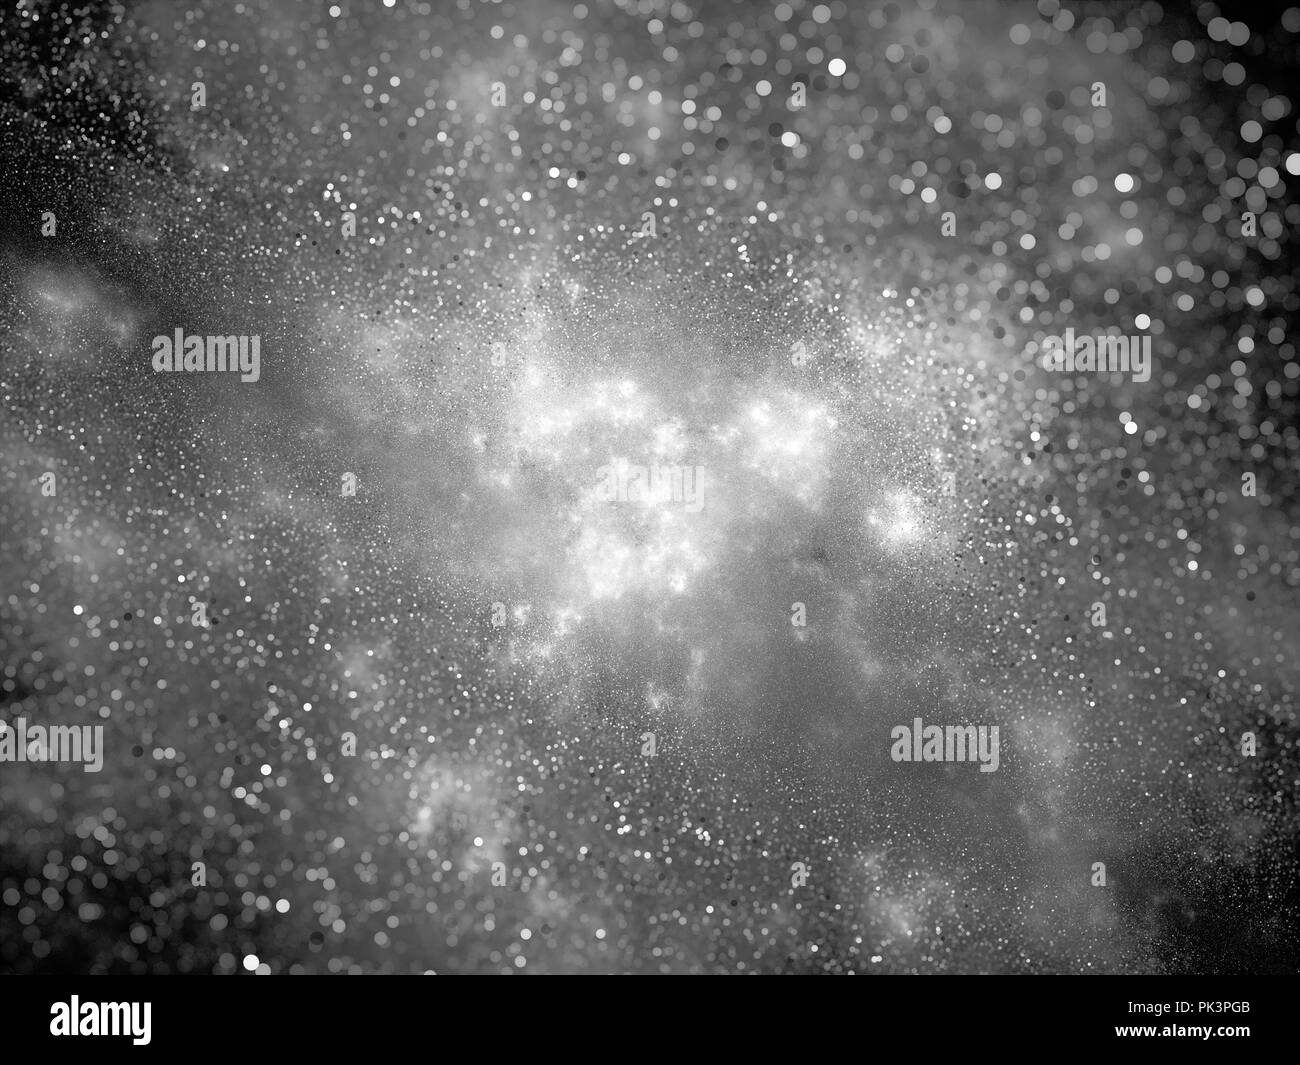 Glowing nebula with particles black and white, computer generated abstract background, 3D rendering Stock Photo